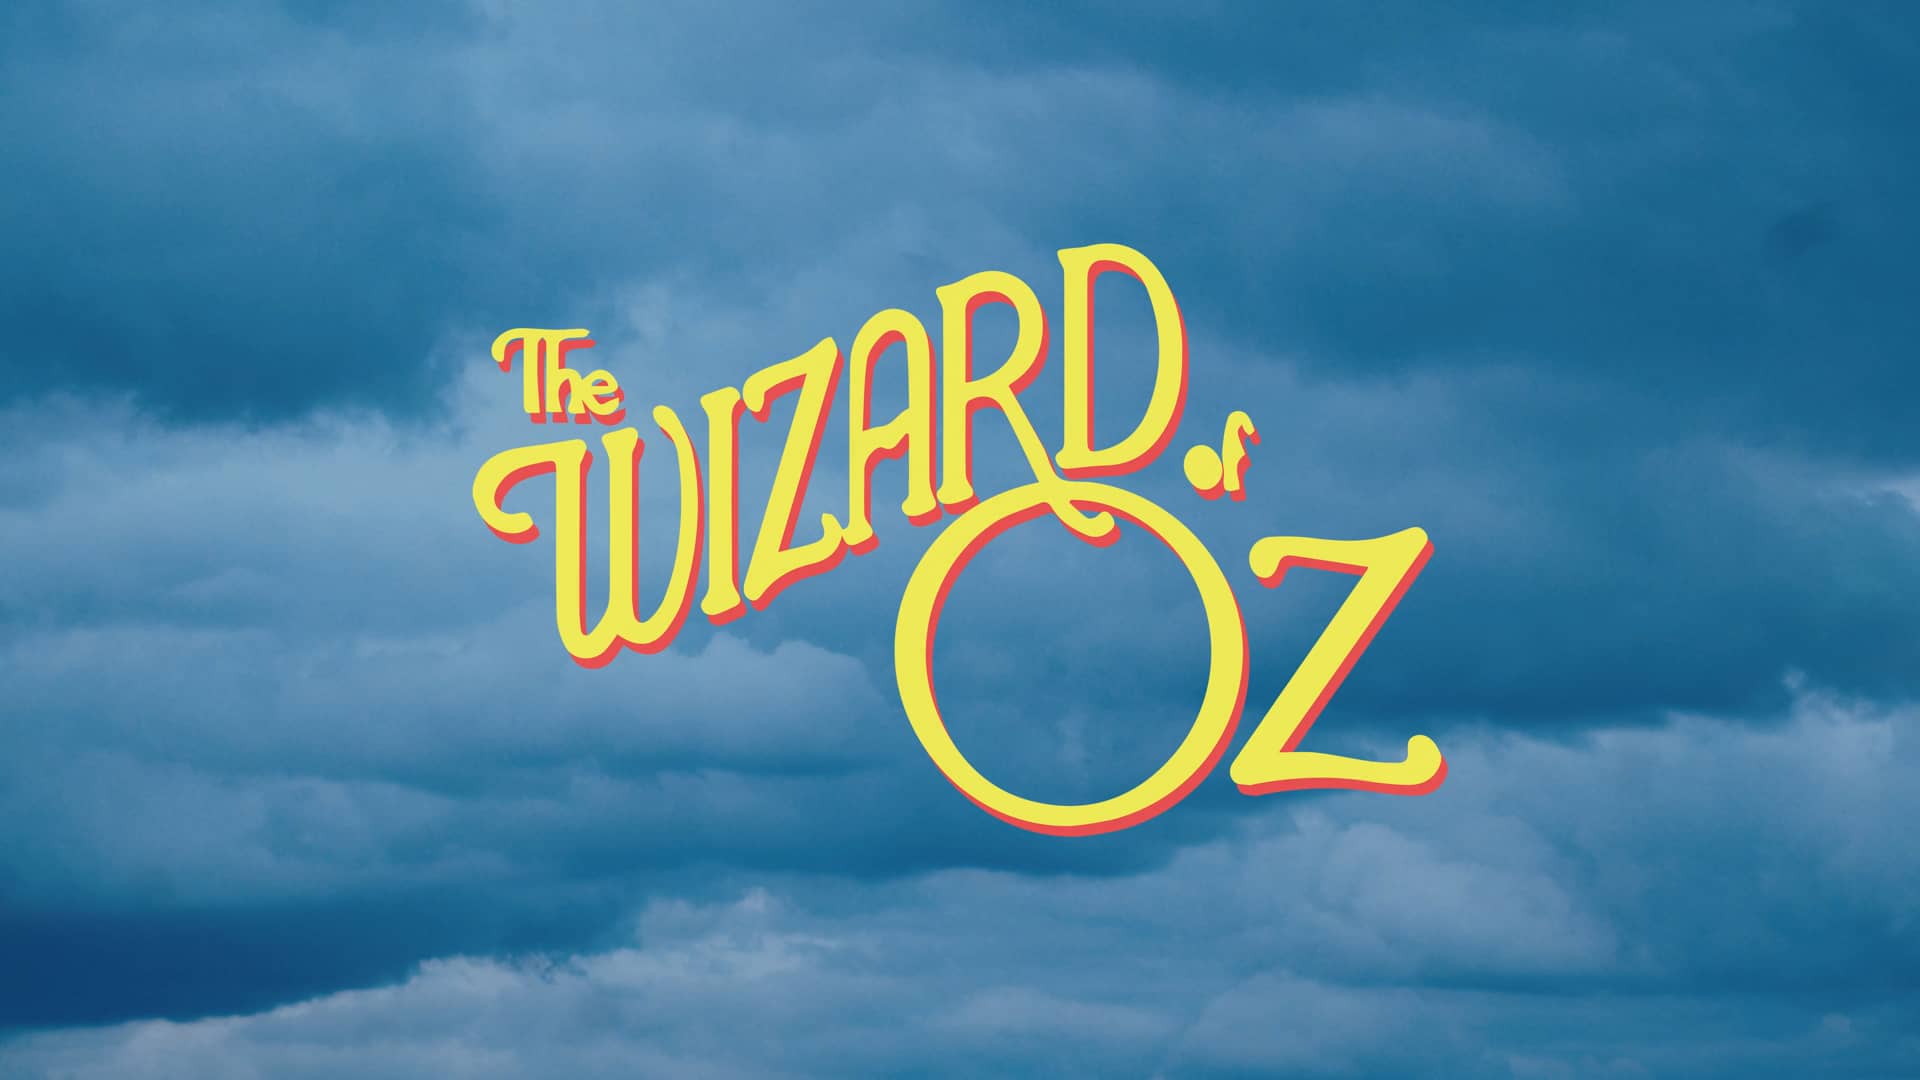 The Wizard of Oz Trailer on Vimeo